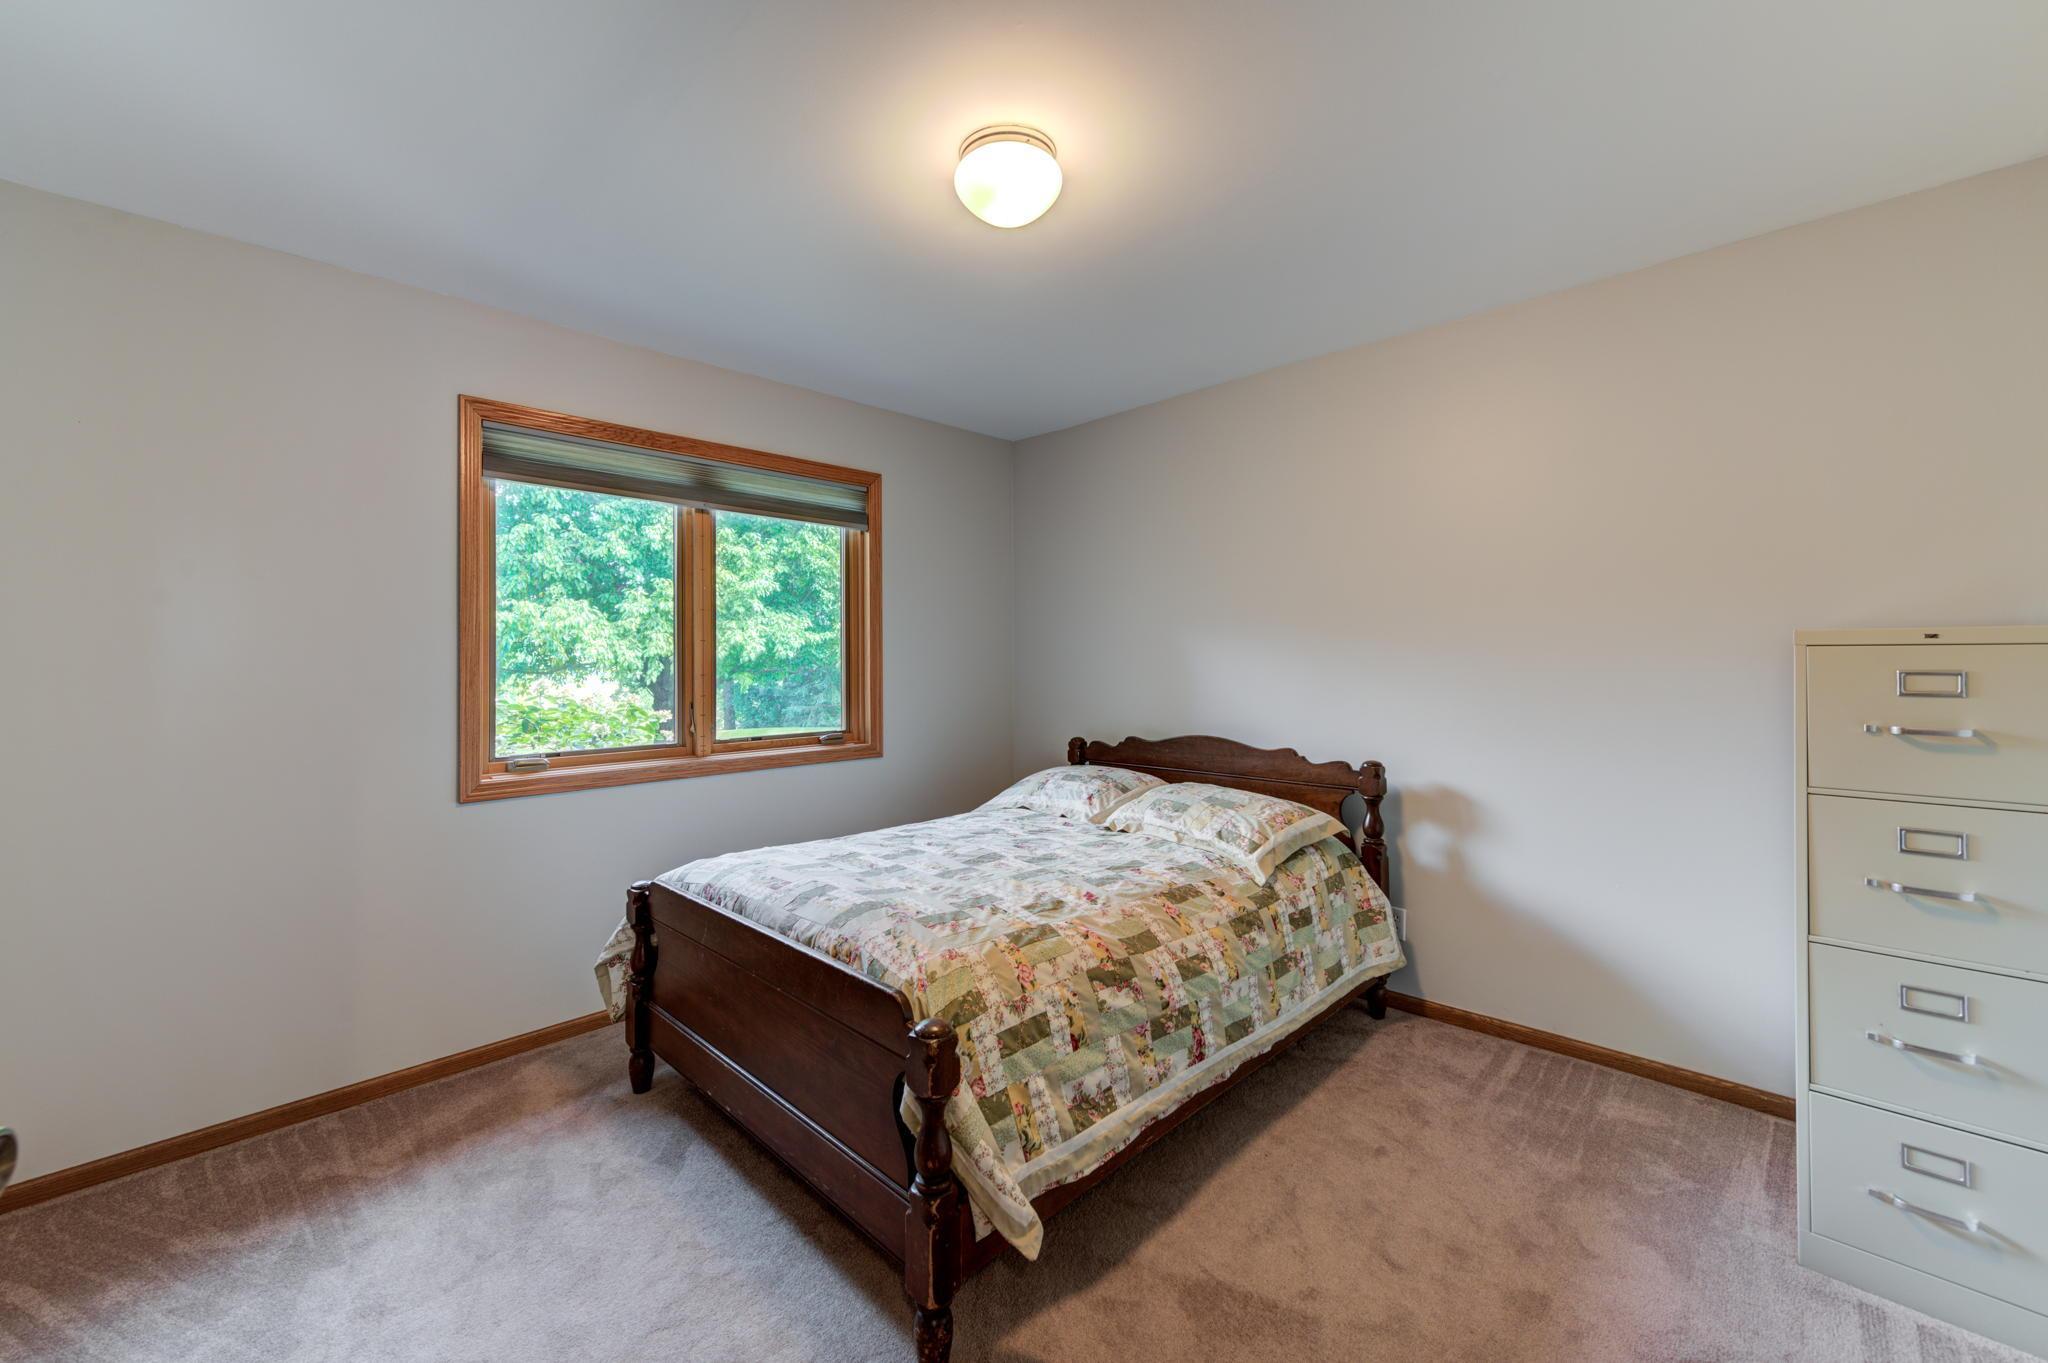 The main level bedroom is very nice sized at 11x14 and has a great location across the hall from a 3/4 bath and the laundry, this home is just a few steps from true one level living!